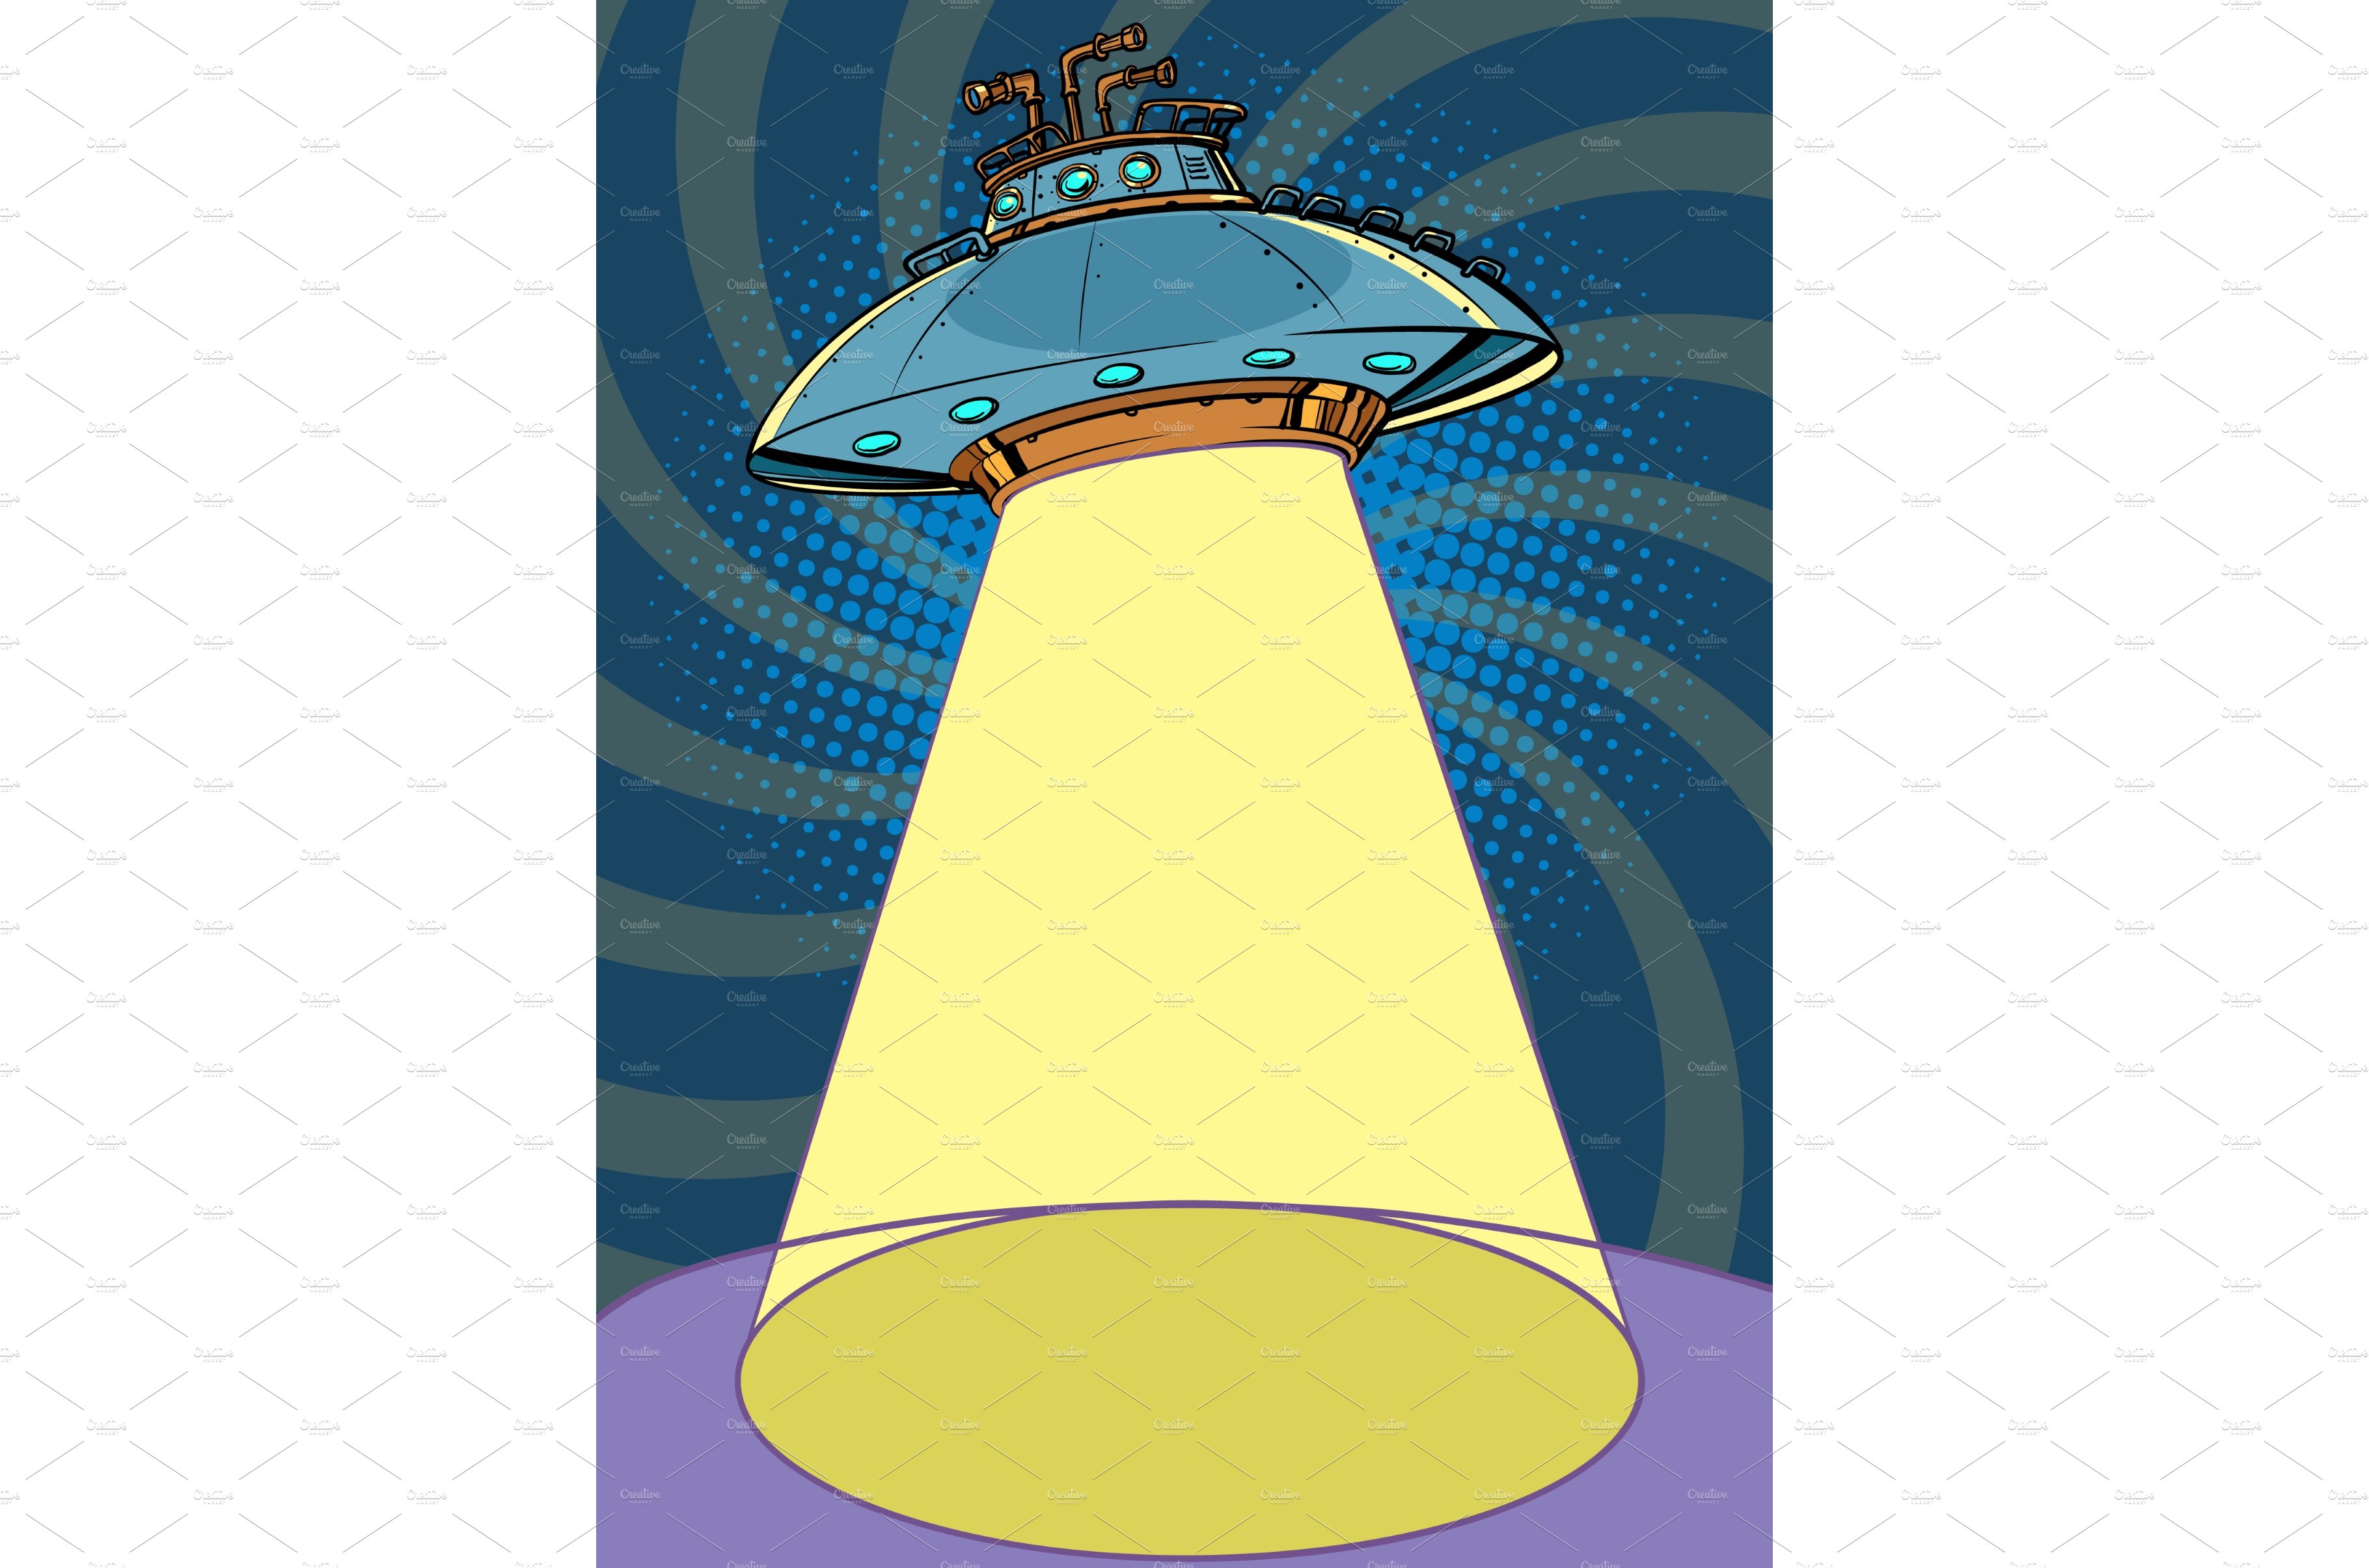 UFO flying saucer with a shining cover image.